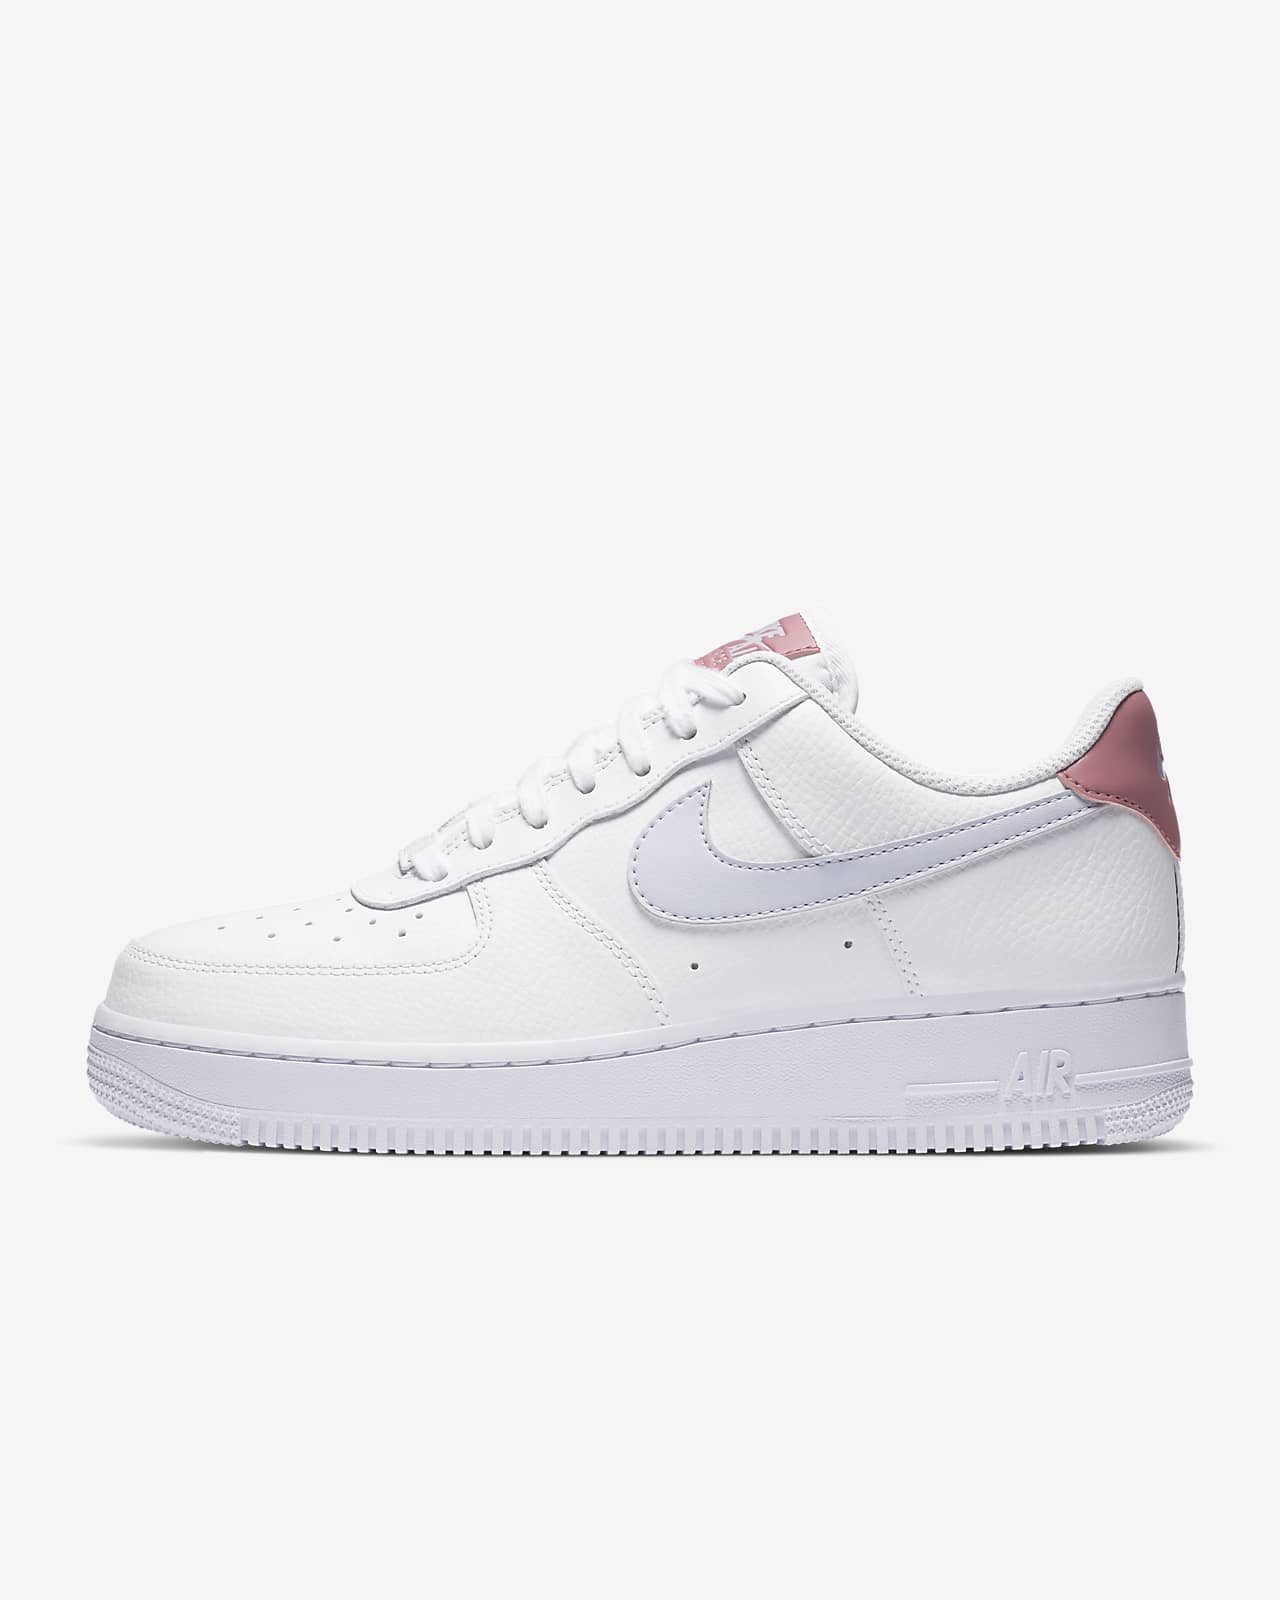 size 1 air force ones